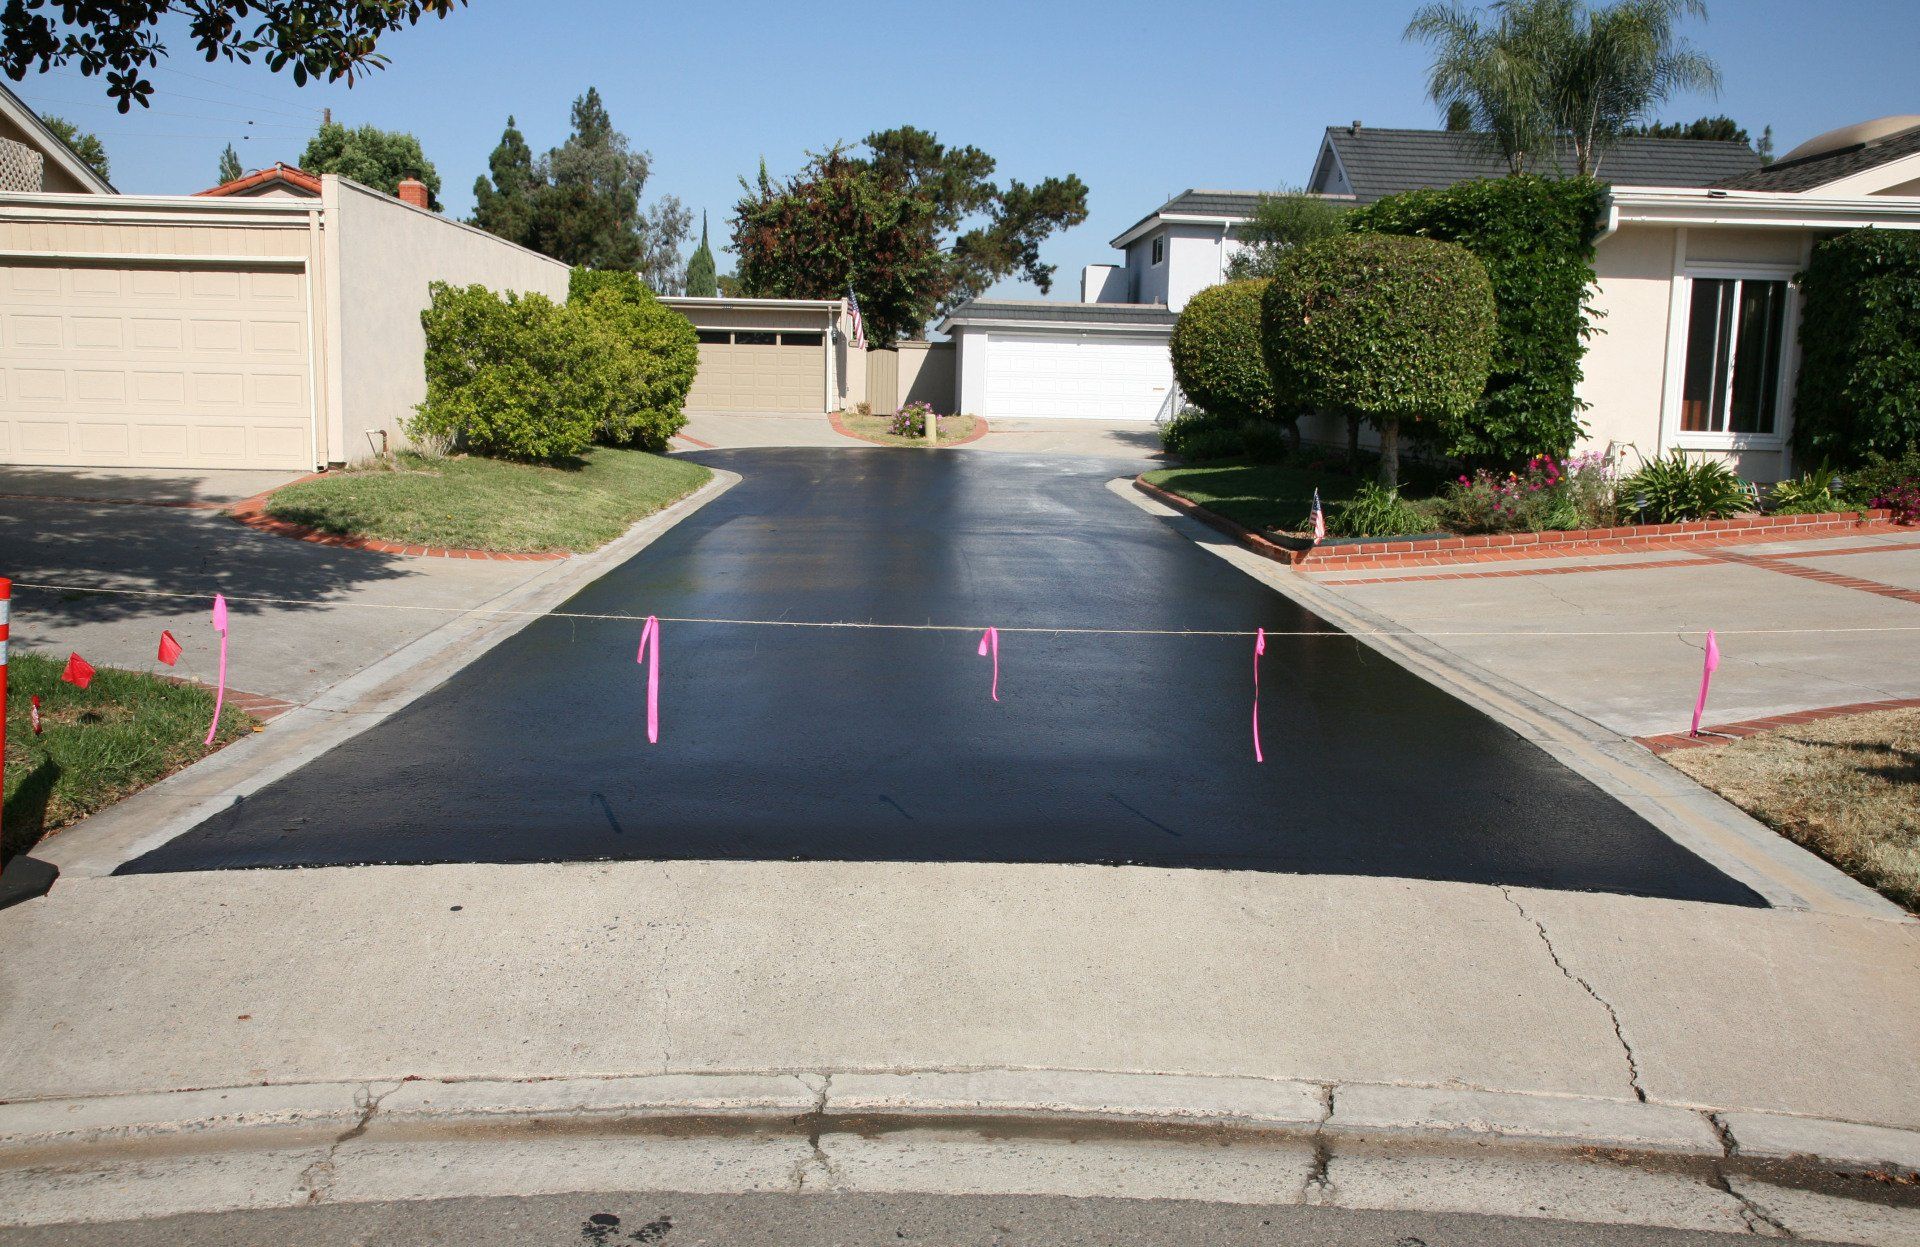 residential driveway paving